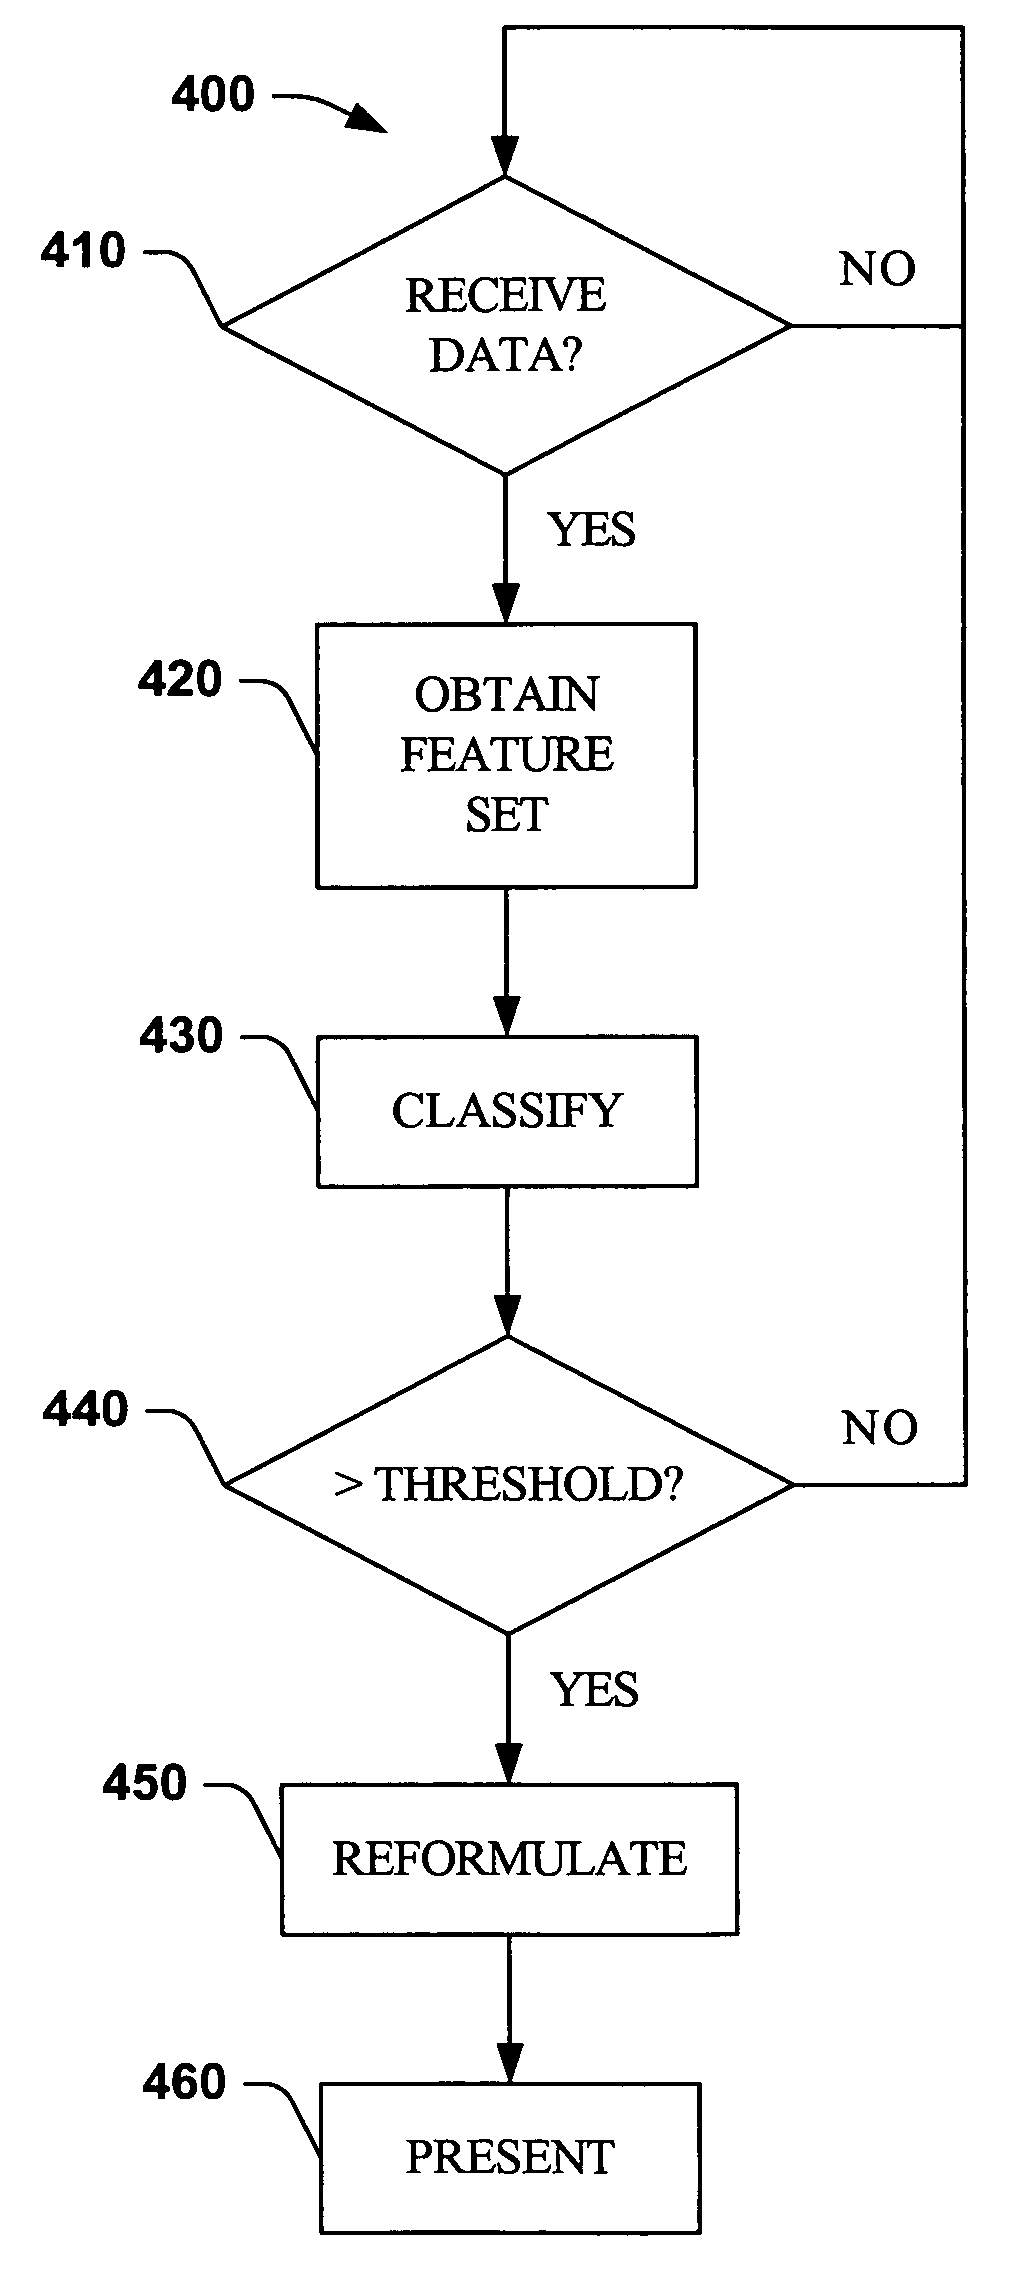 Systems and methods that determine intent of data and respond to the data based on the intent